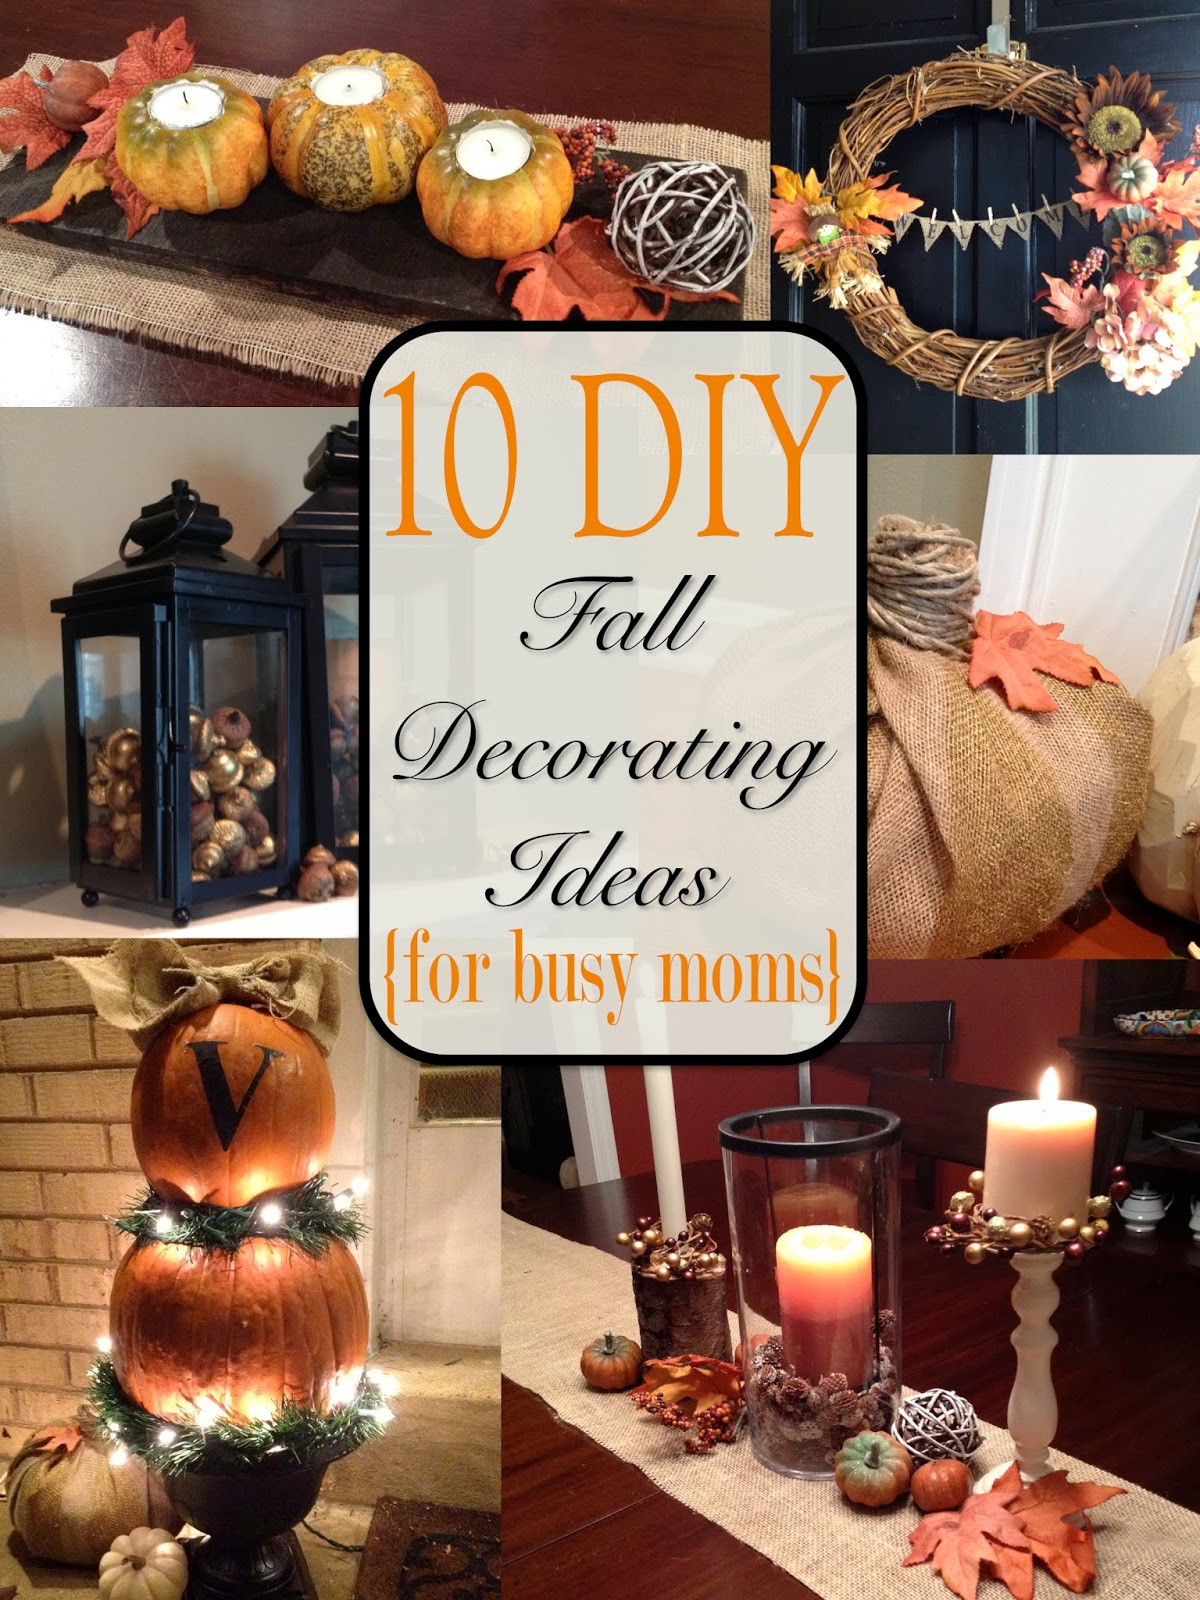 Autumn Decorations Diy
 Two It Yourself Fall Home Tour 10 DIY Fall Decorating